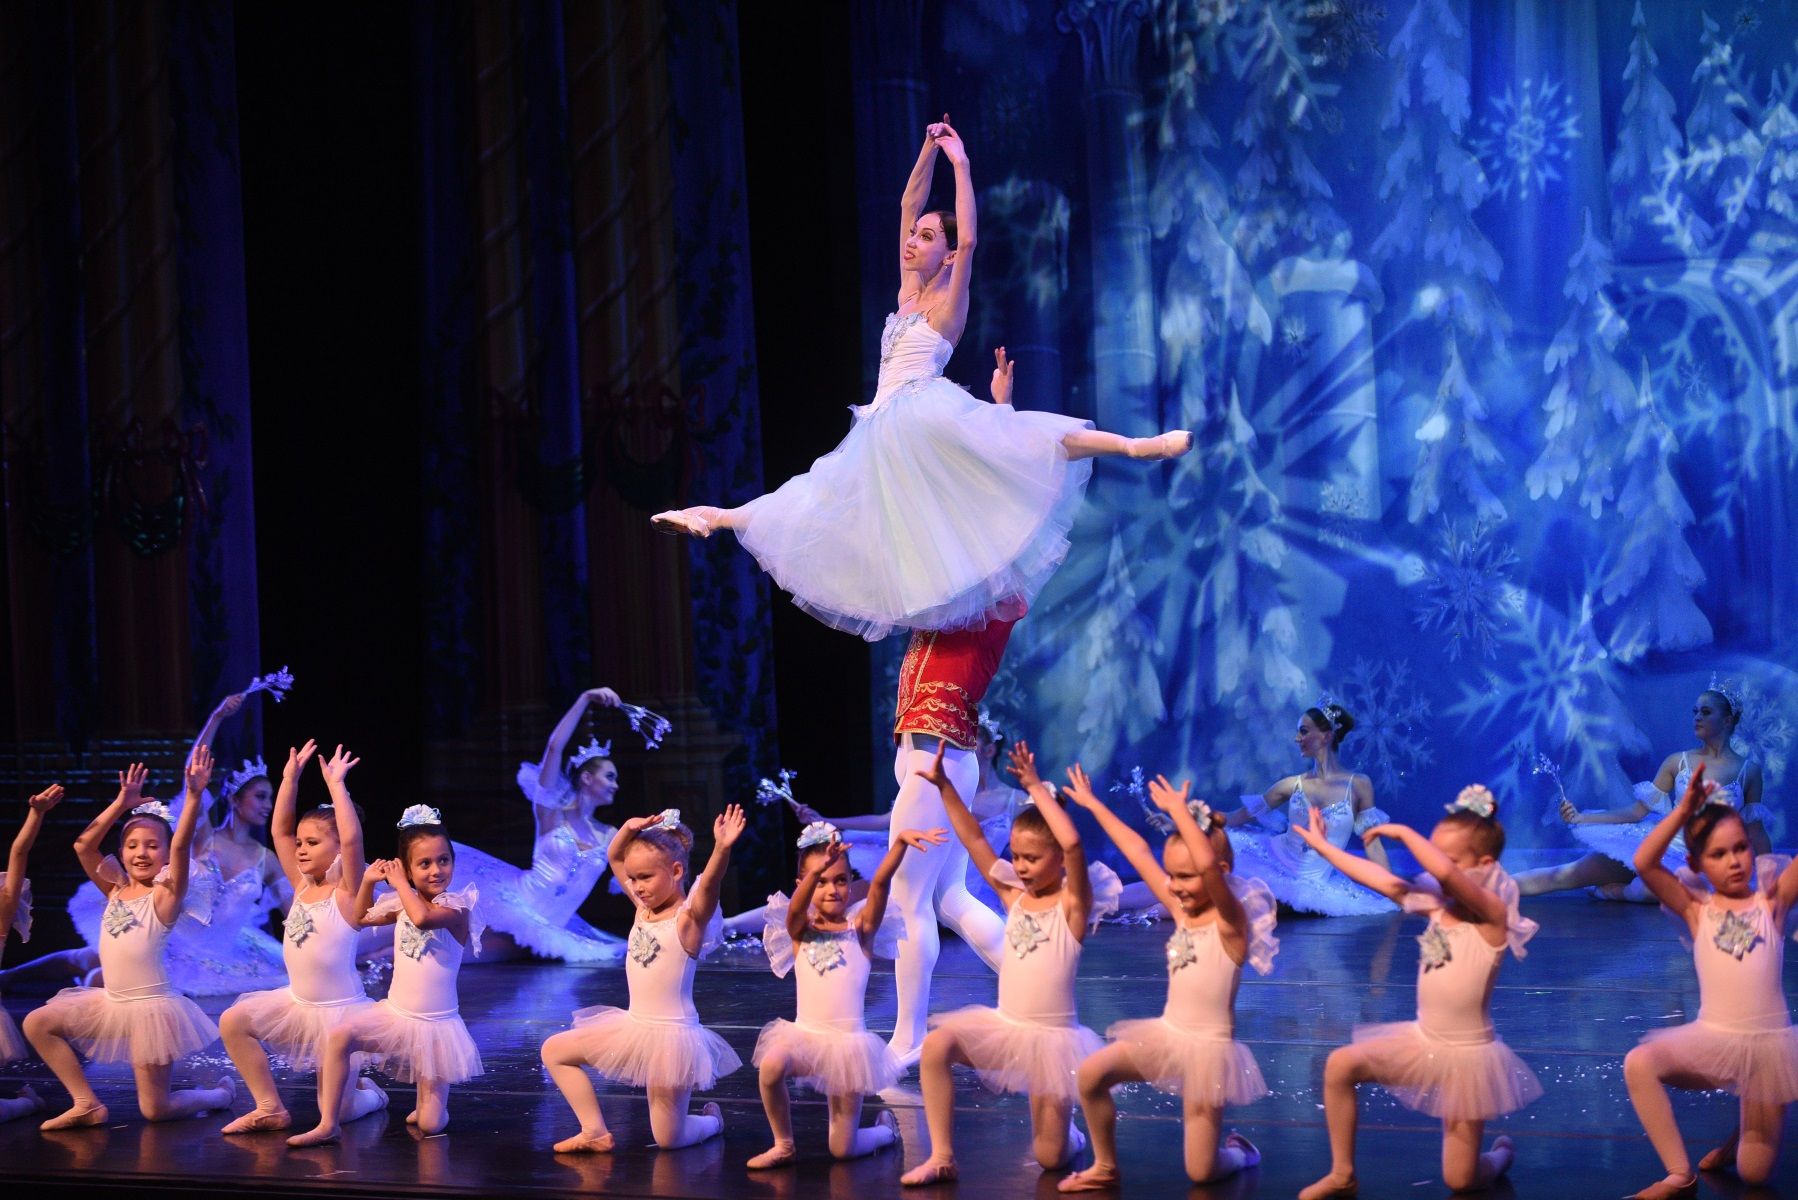 The Nutcracker Ballet will be performed at multiple locations throughout Dallas